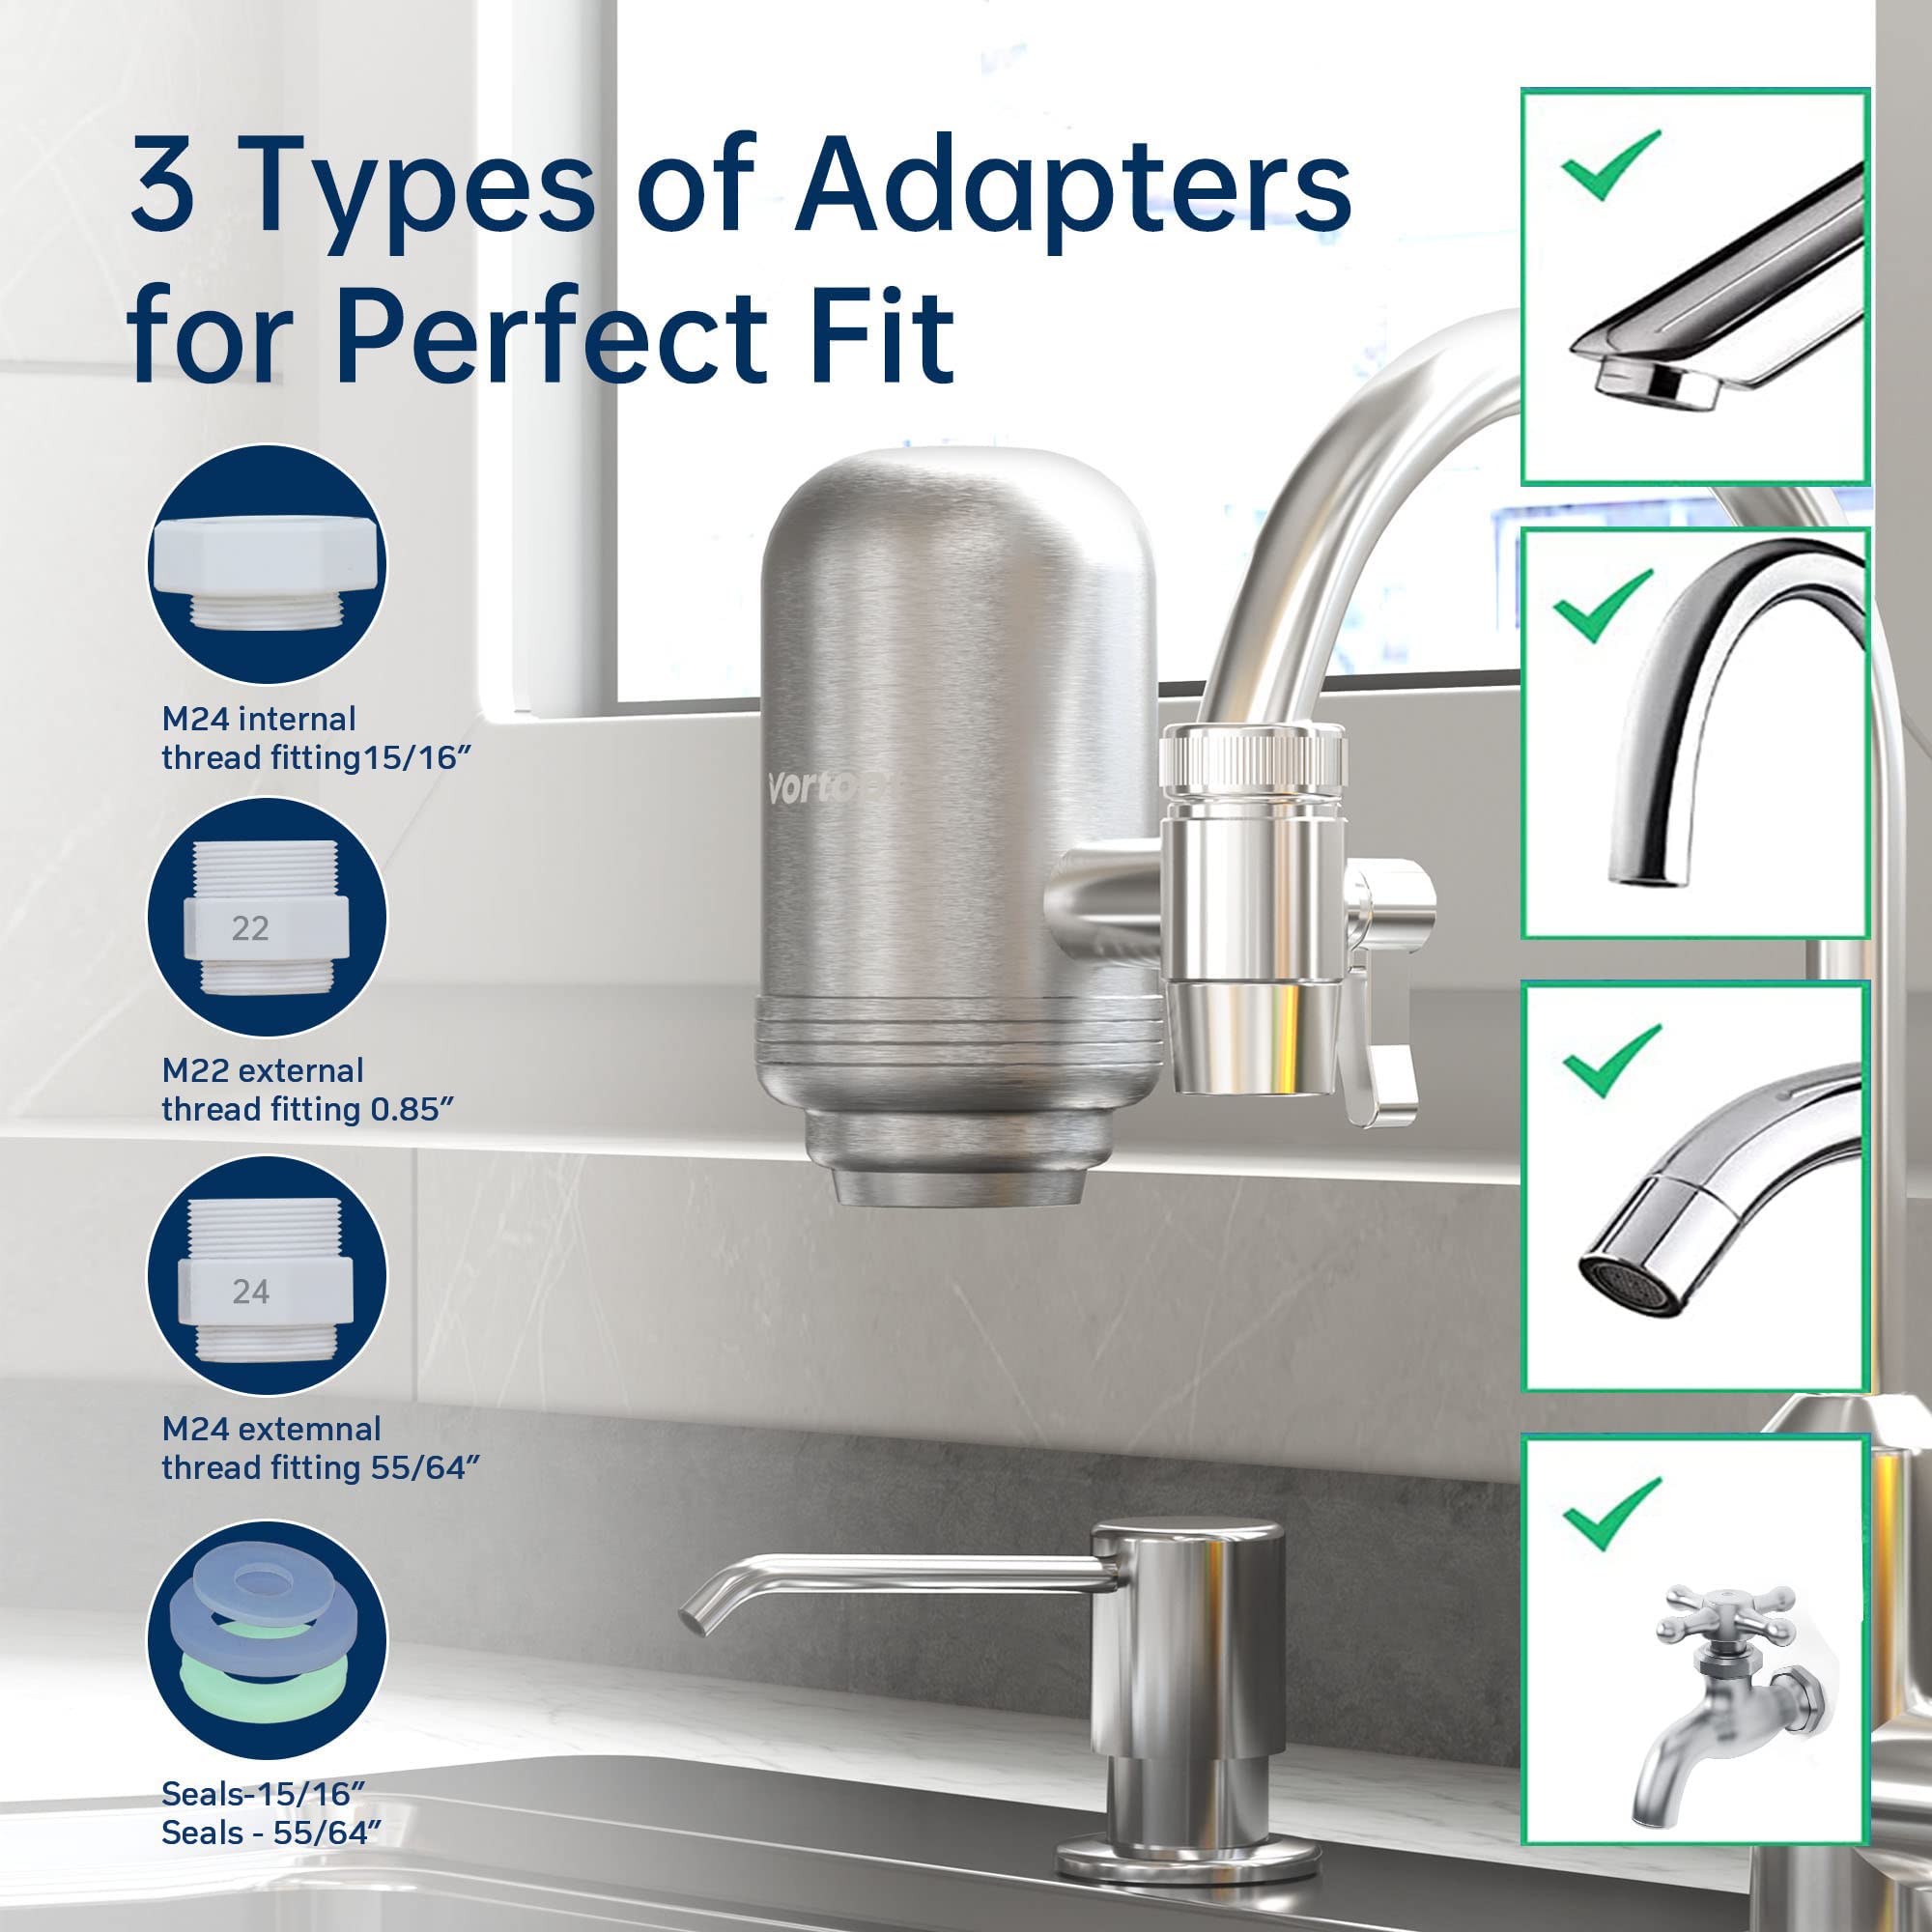 Stainless Steel Faucet Water Filter for Sink - T2 500G